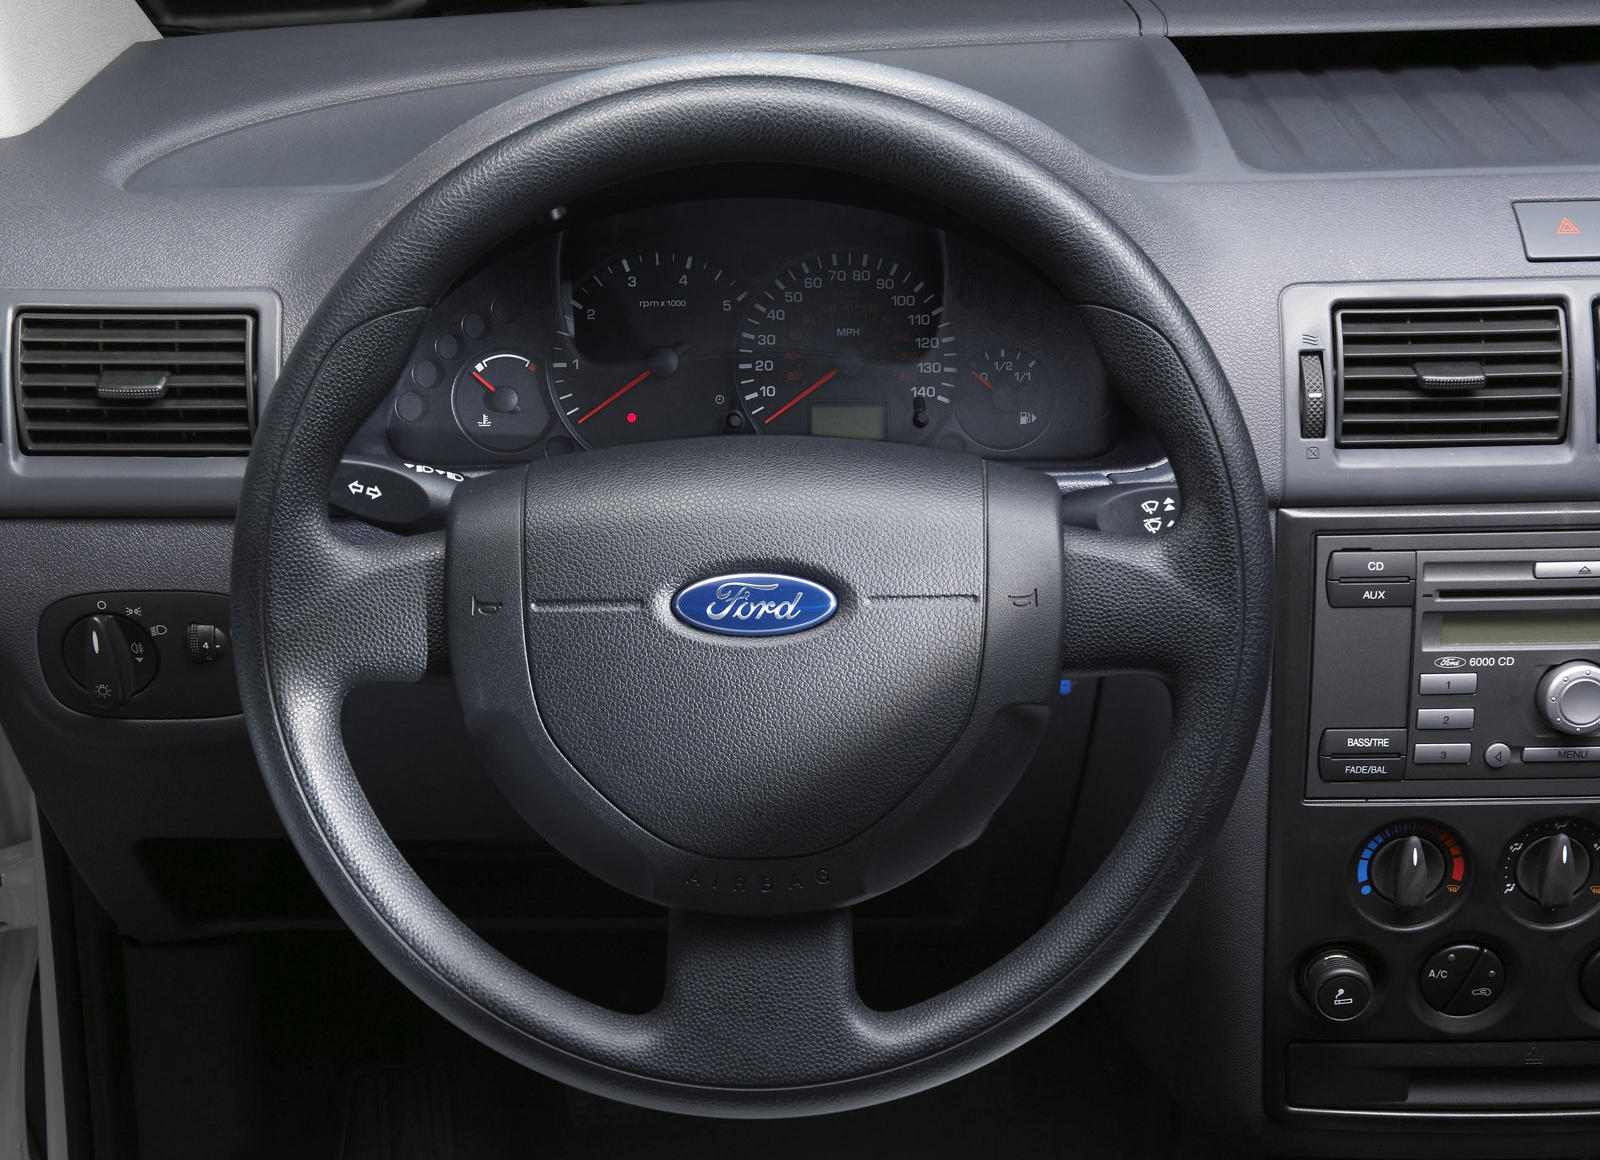 2013 Ford Transit Connect Cargo Van Dashboard